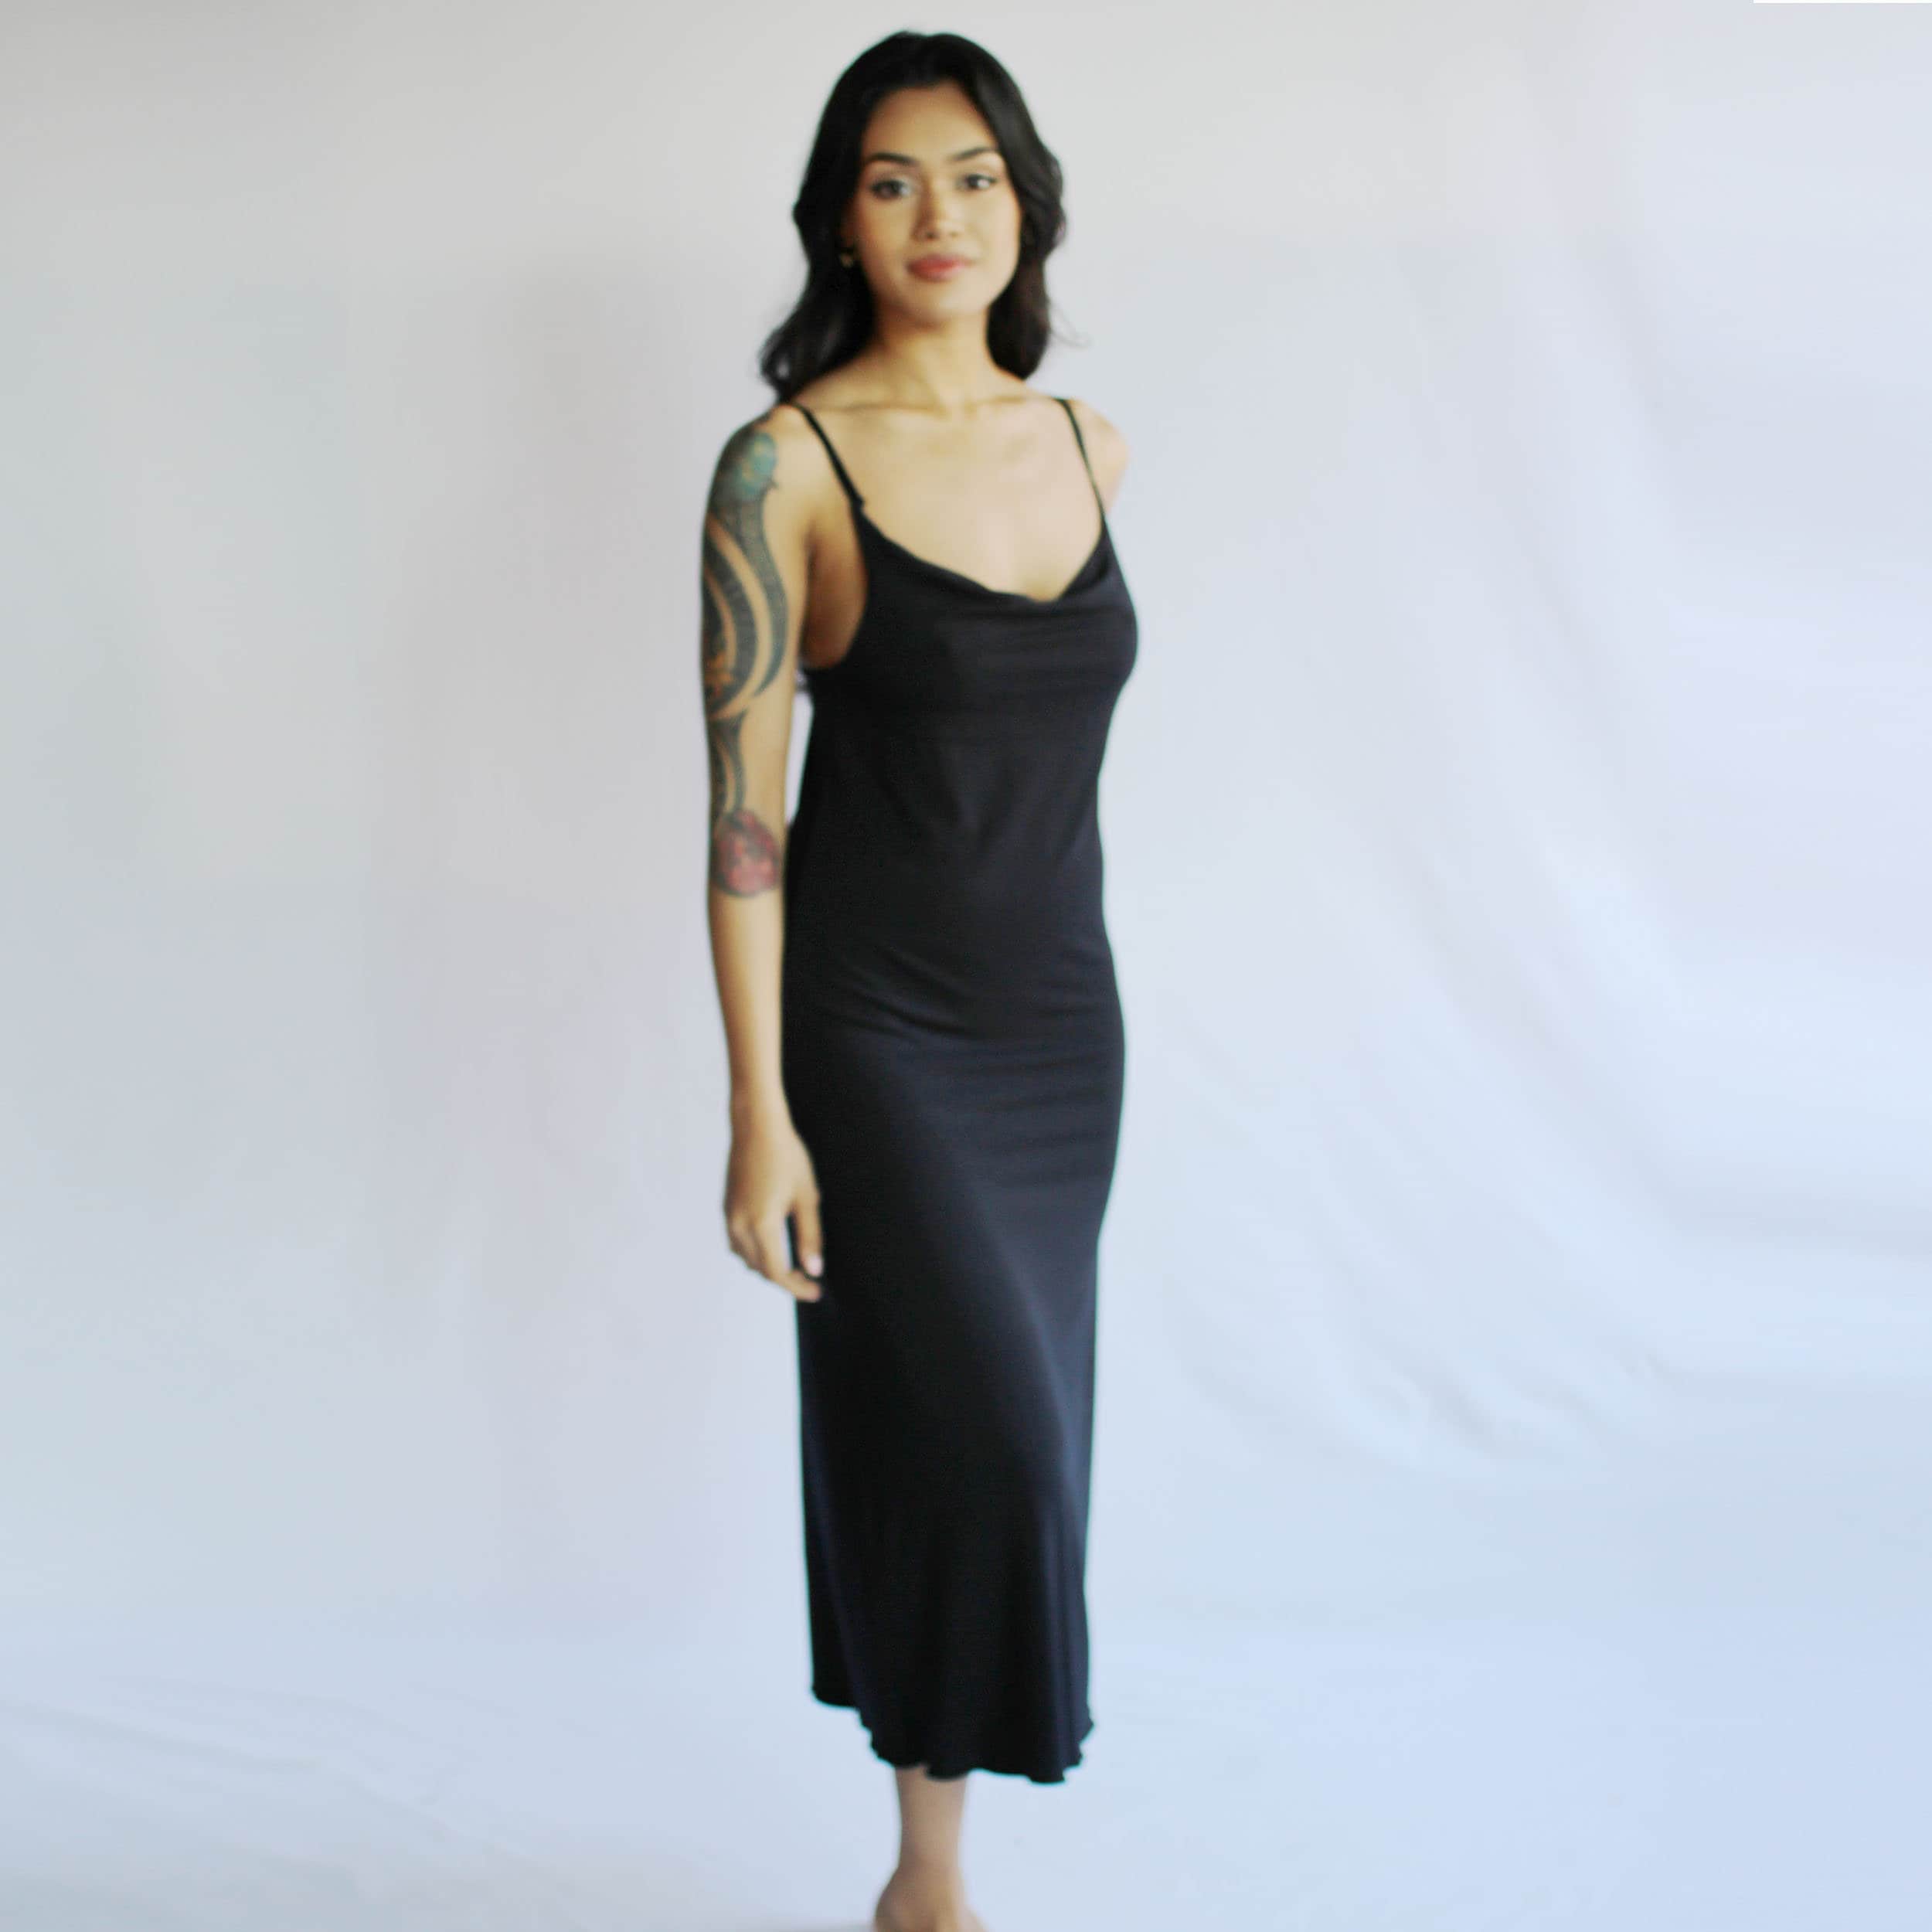 Long Night Gown, Womens Nightdress, Draped Neckline Dress, Natural Sleepwear, Bamboo Nightgown, made to order, made in the USA